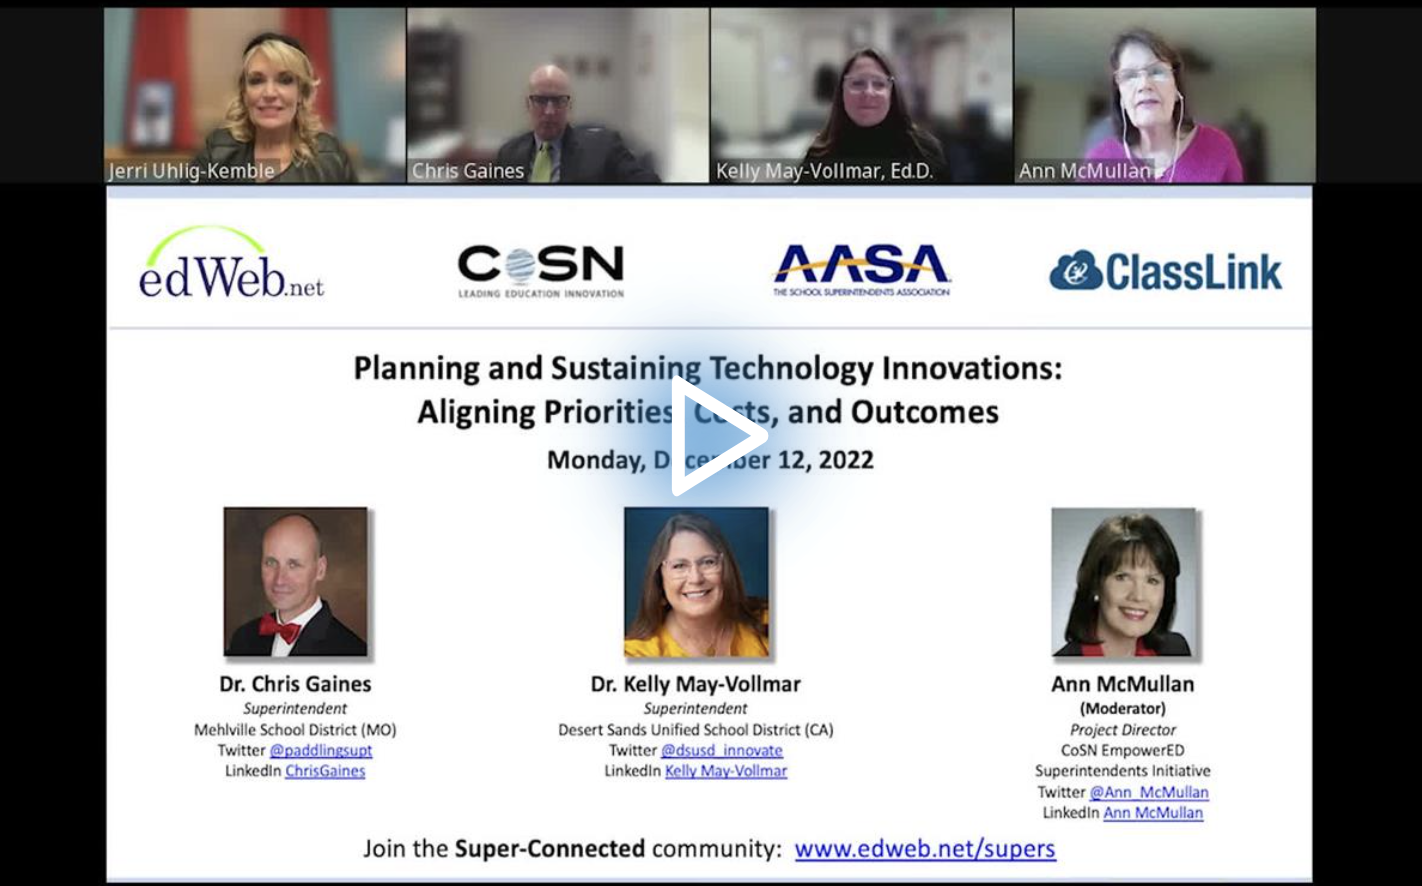 Planning and Sustaining Technology Innovations: Aligning Priorities, Costs, and Outcomes edLeader Panel recording screenshot